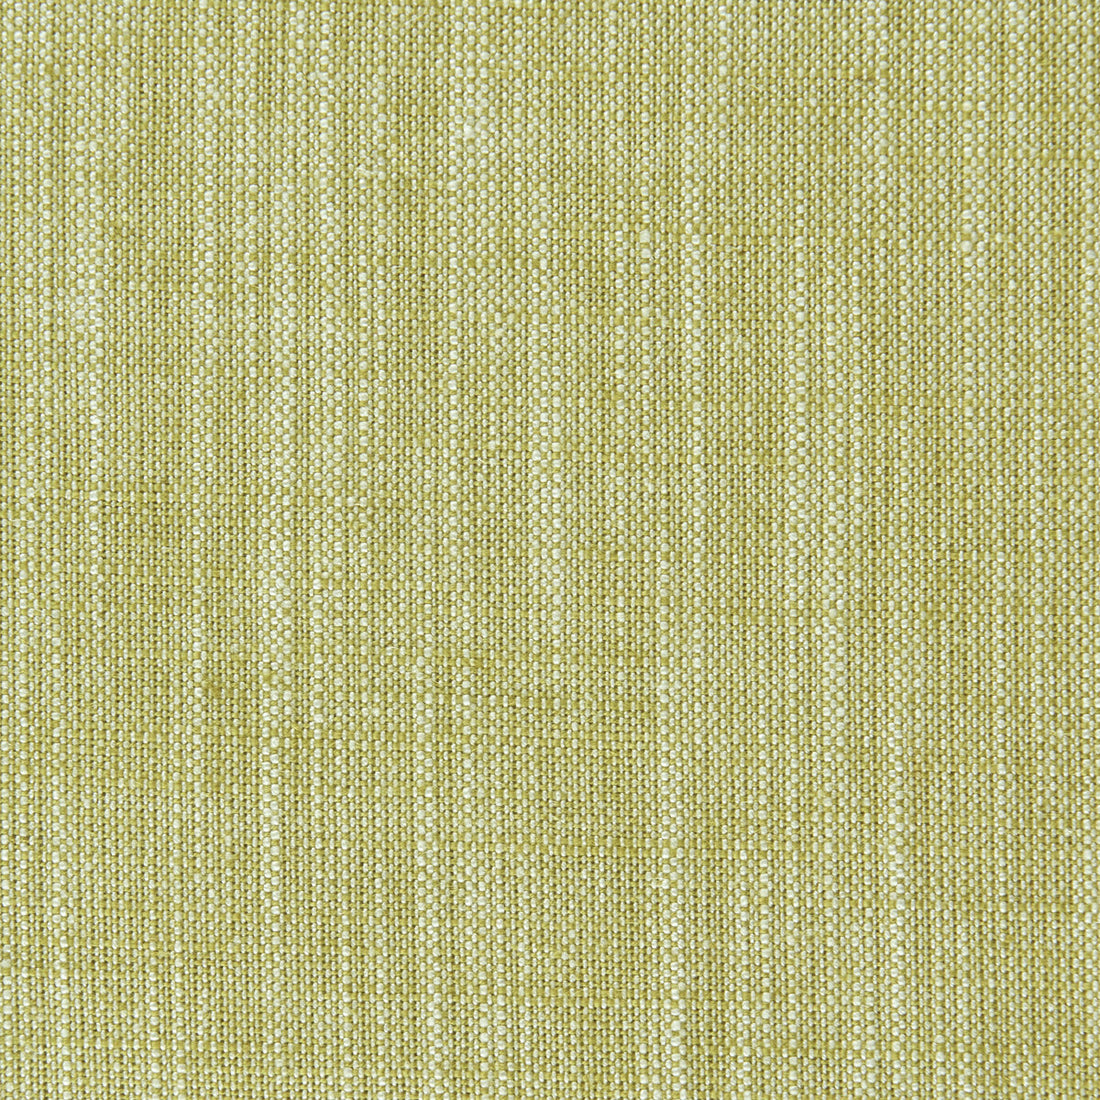 Biarritz fabric in citrus color - pattern F0965/11.CAC.0 - by Clarke And Clarke in the Clarke &amp; Clarke Biarritz collection